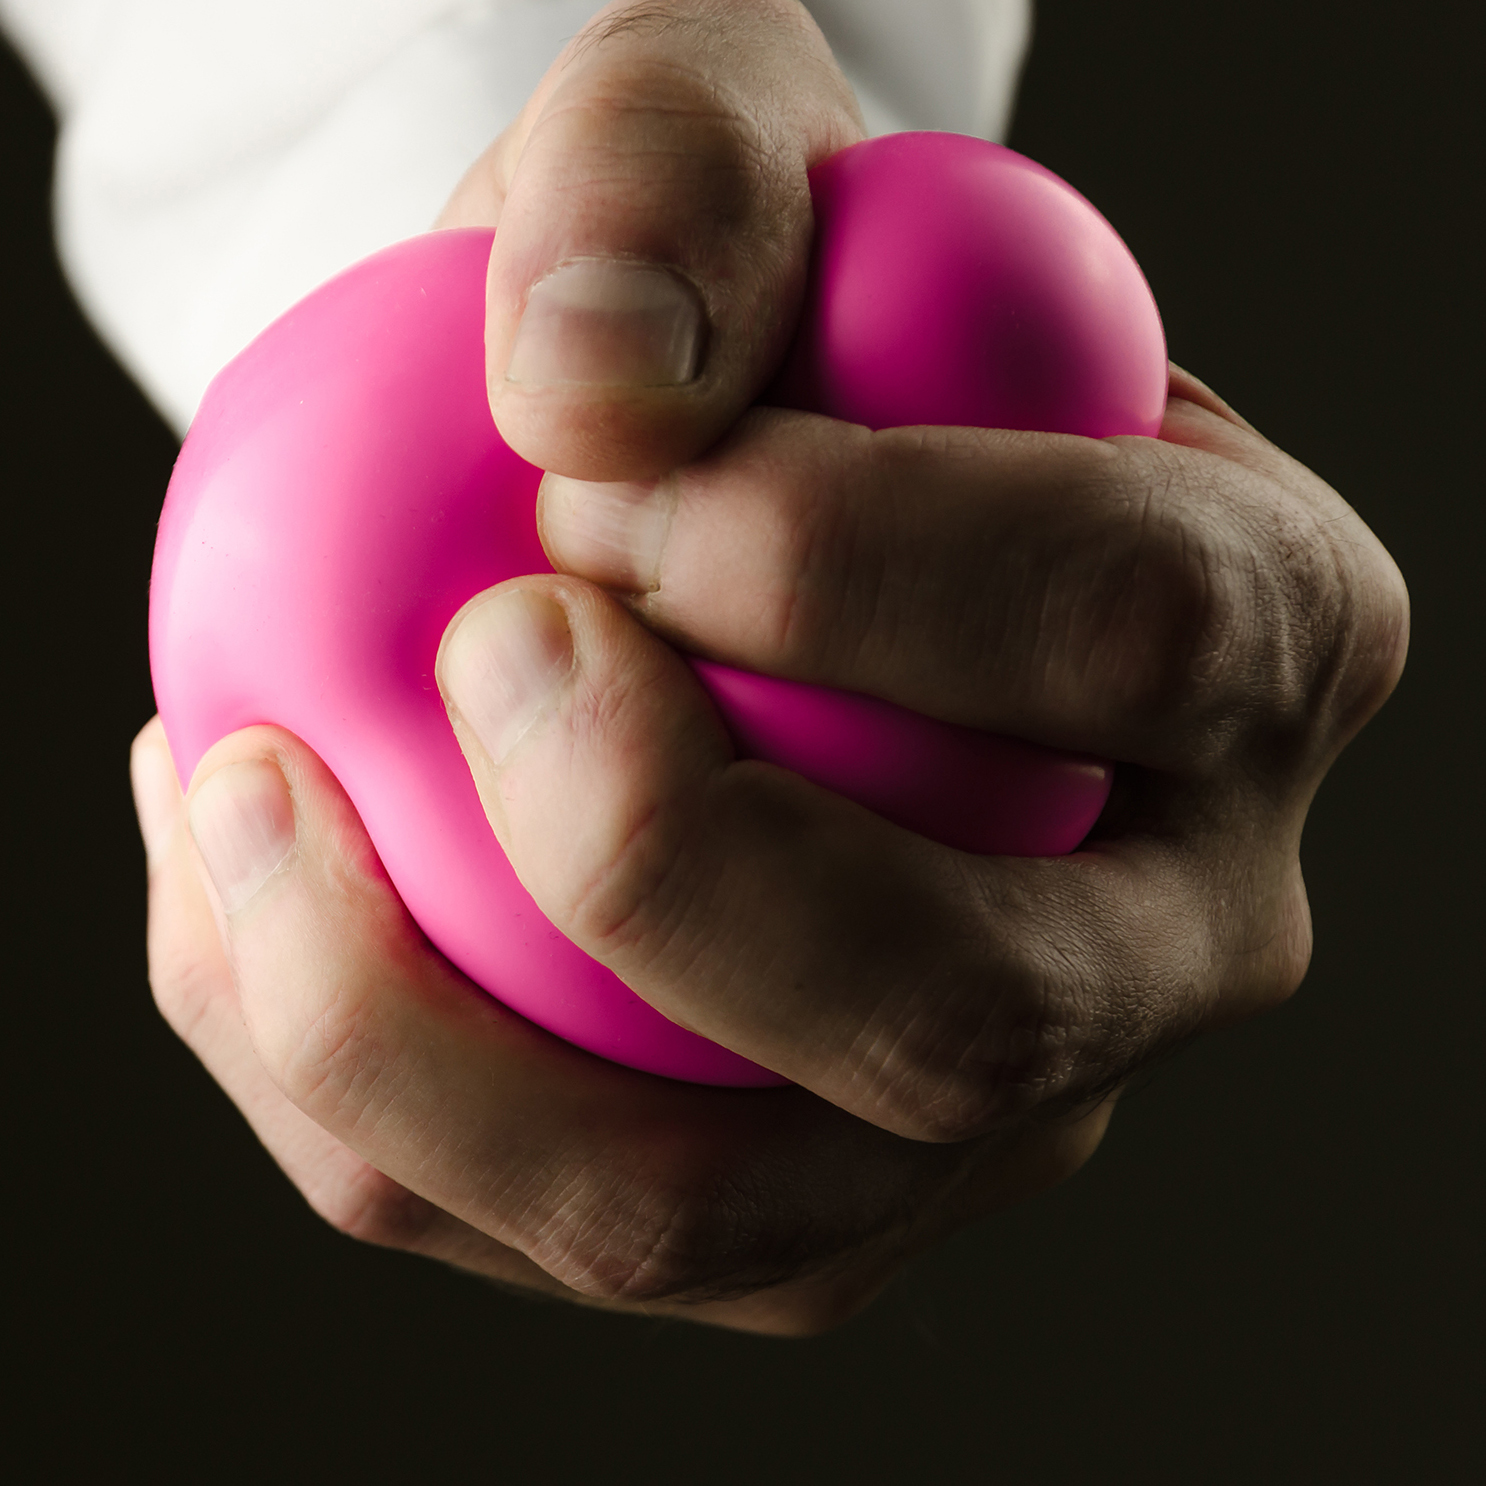 Arm or hand with a white shirt pressure pink anti stress ball in the dark or black background